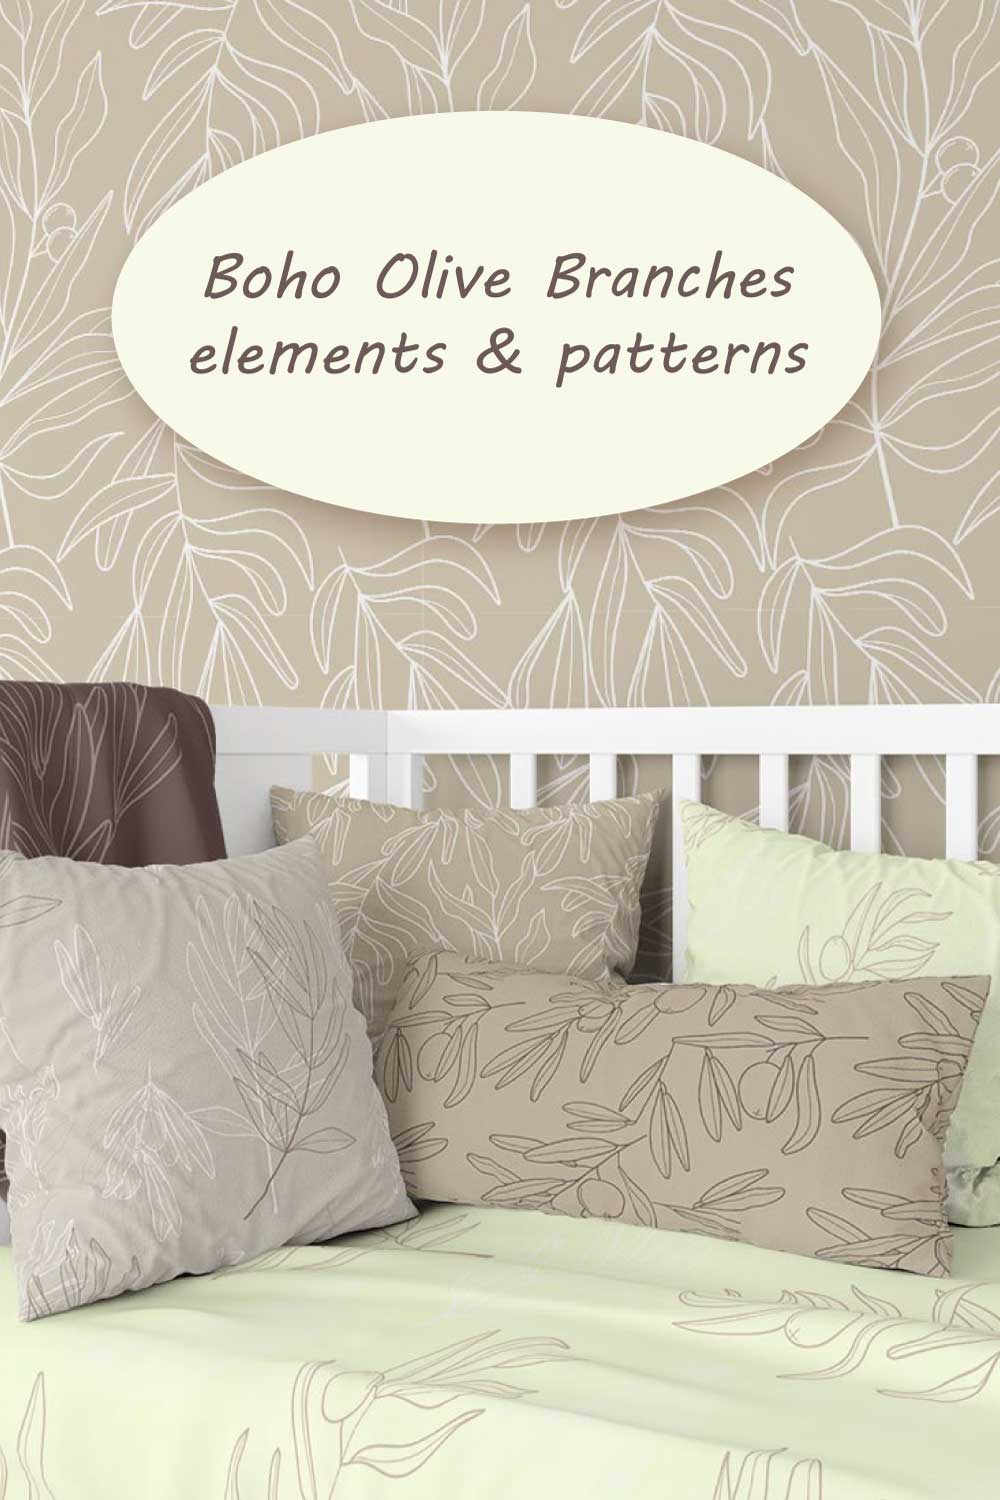 Boho Olive Branches Elements & Patterns - pinterest image preview.